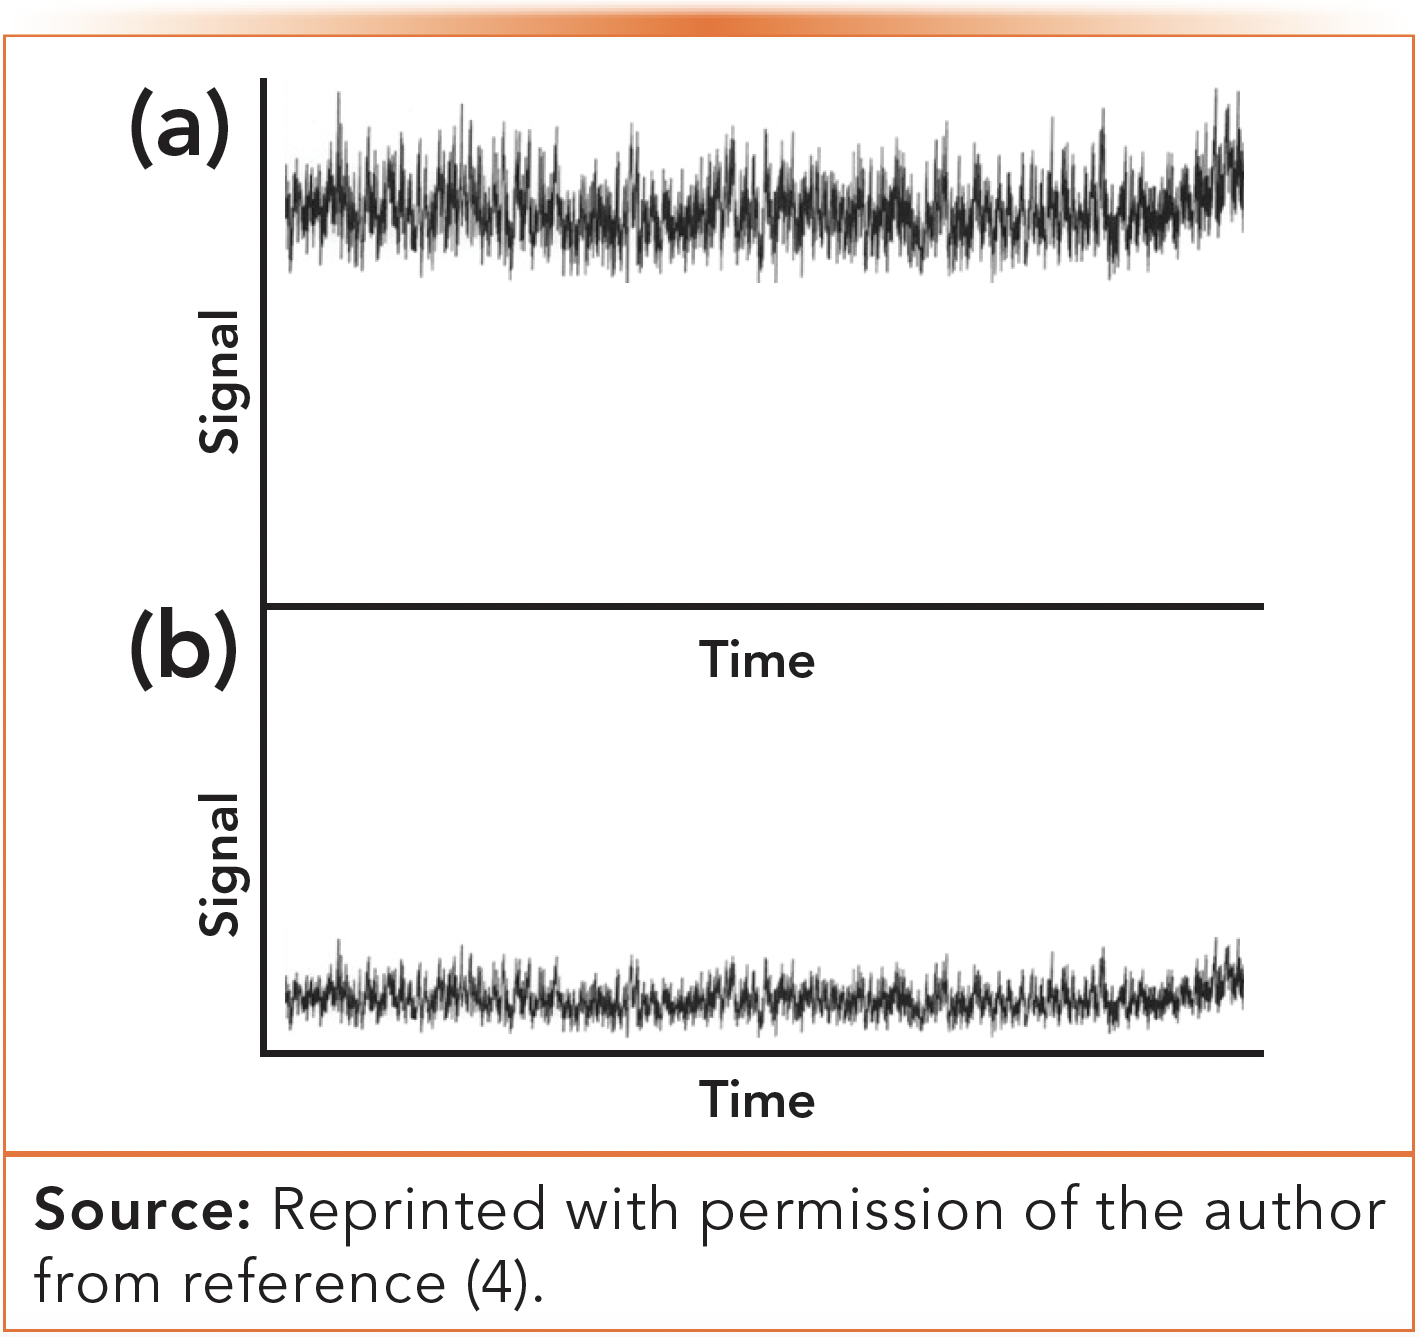 FIGURE 1: Expanded chromatograms showing baseline noise with no sample injected. (a) Elevated background signal with greater noise; (b) original noise with system running properly.